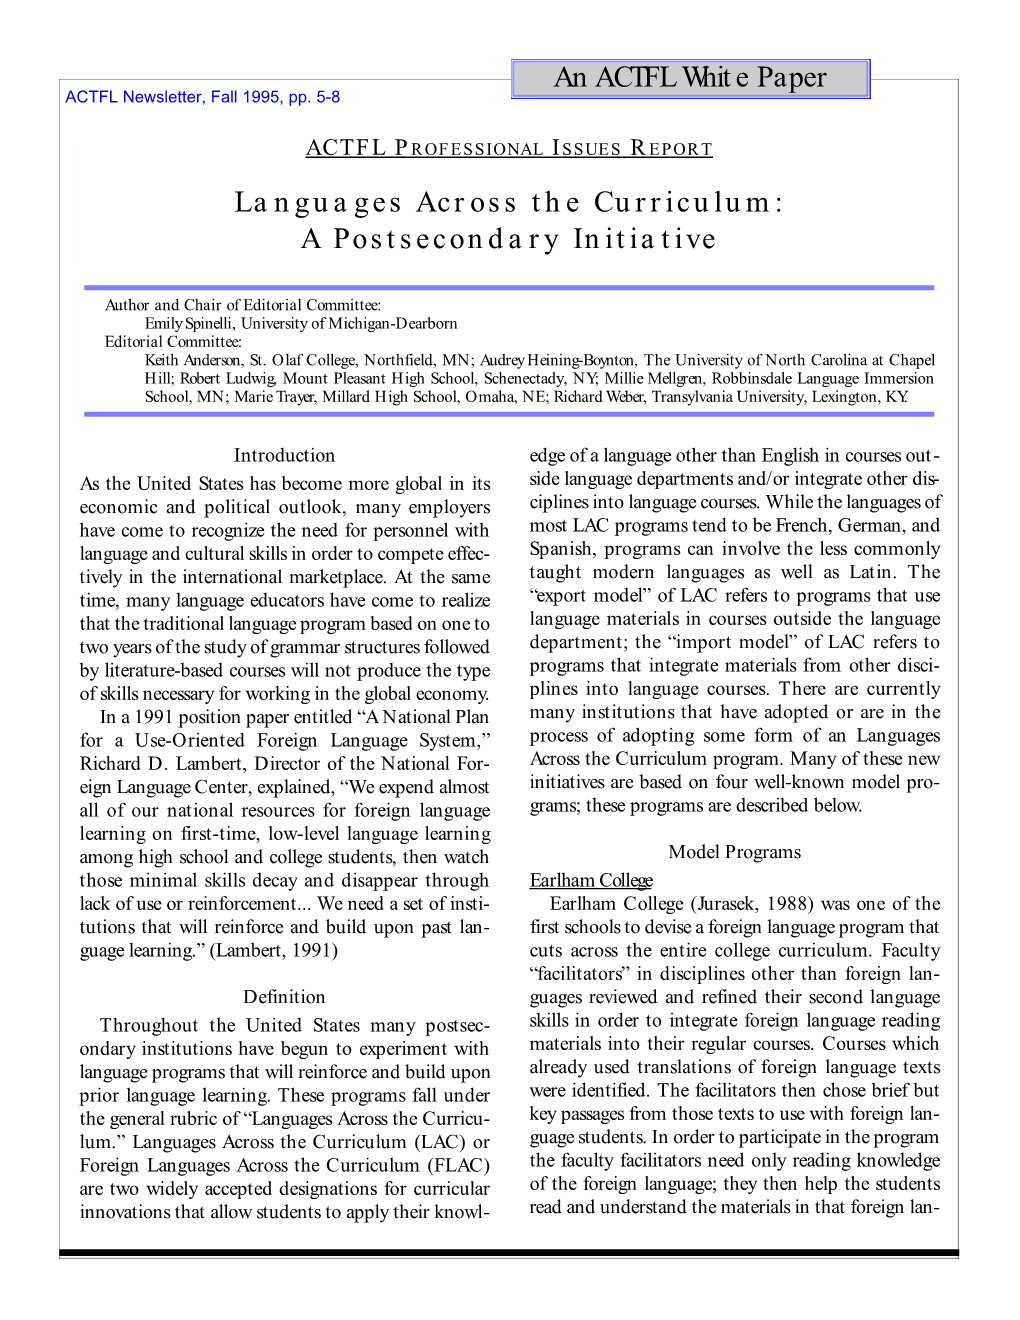 An ACTFL White Paper Languages Across the Curriculum: a Postsecondary Initiative